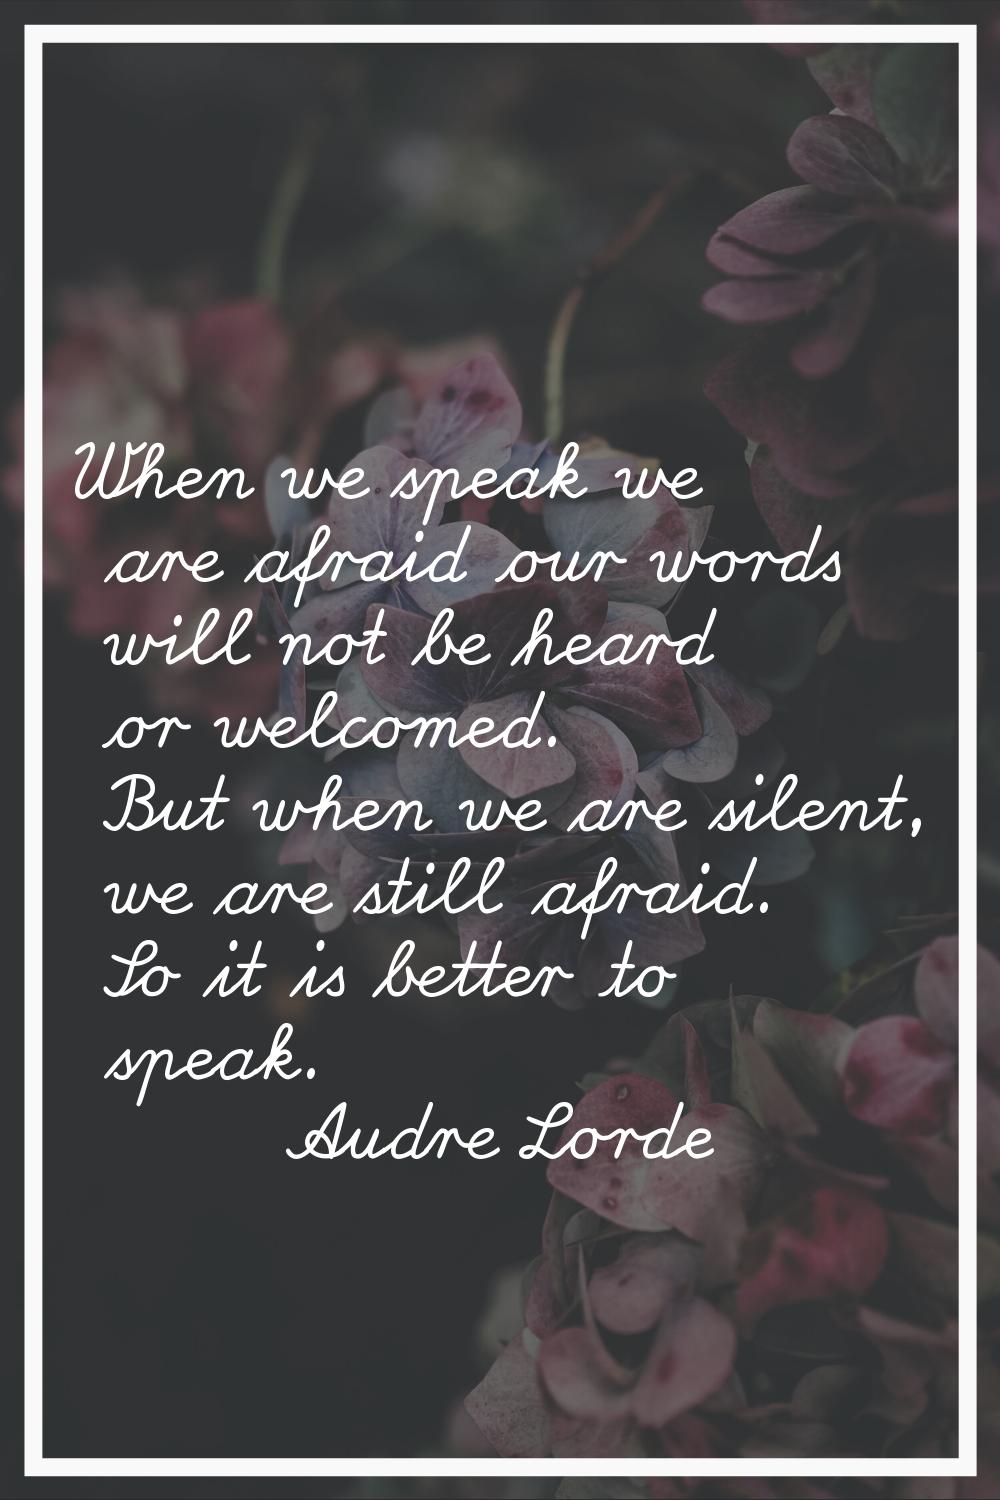 When we speak we are afraid our words will not be heard or welcomed. But when we are silent, we are